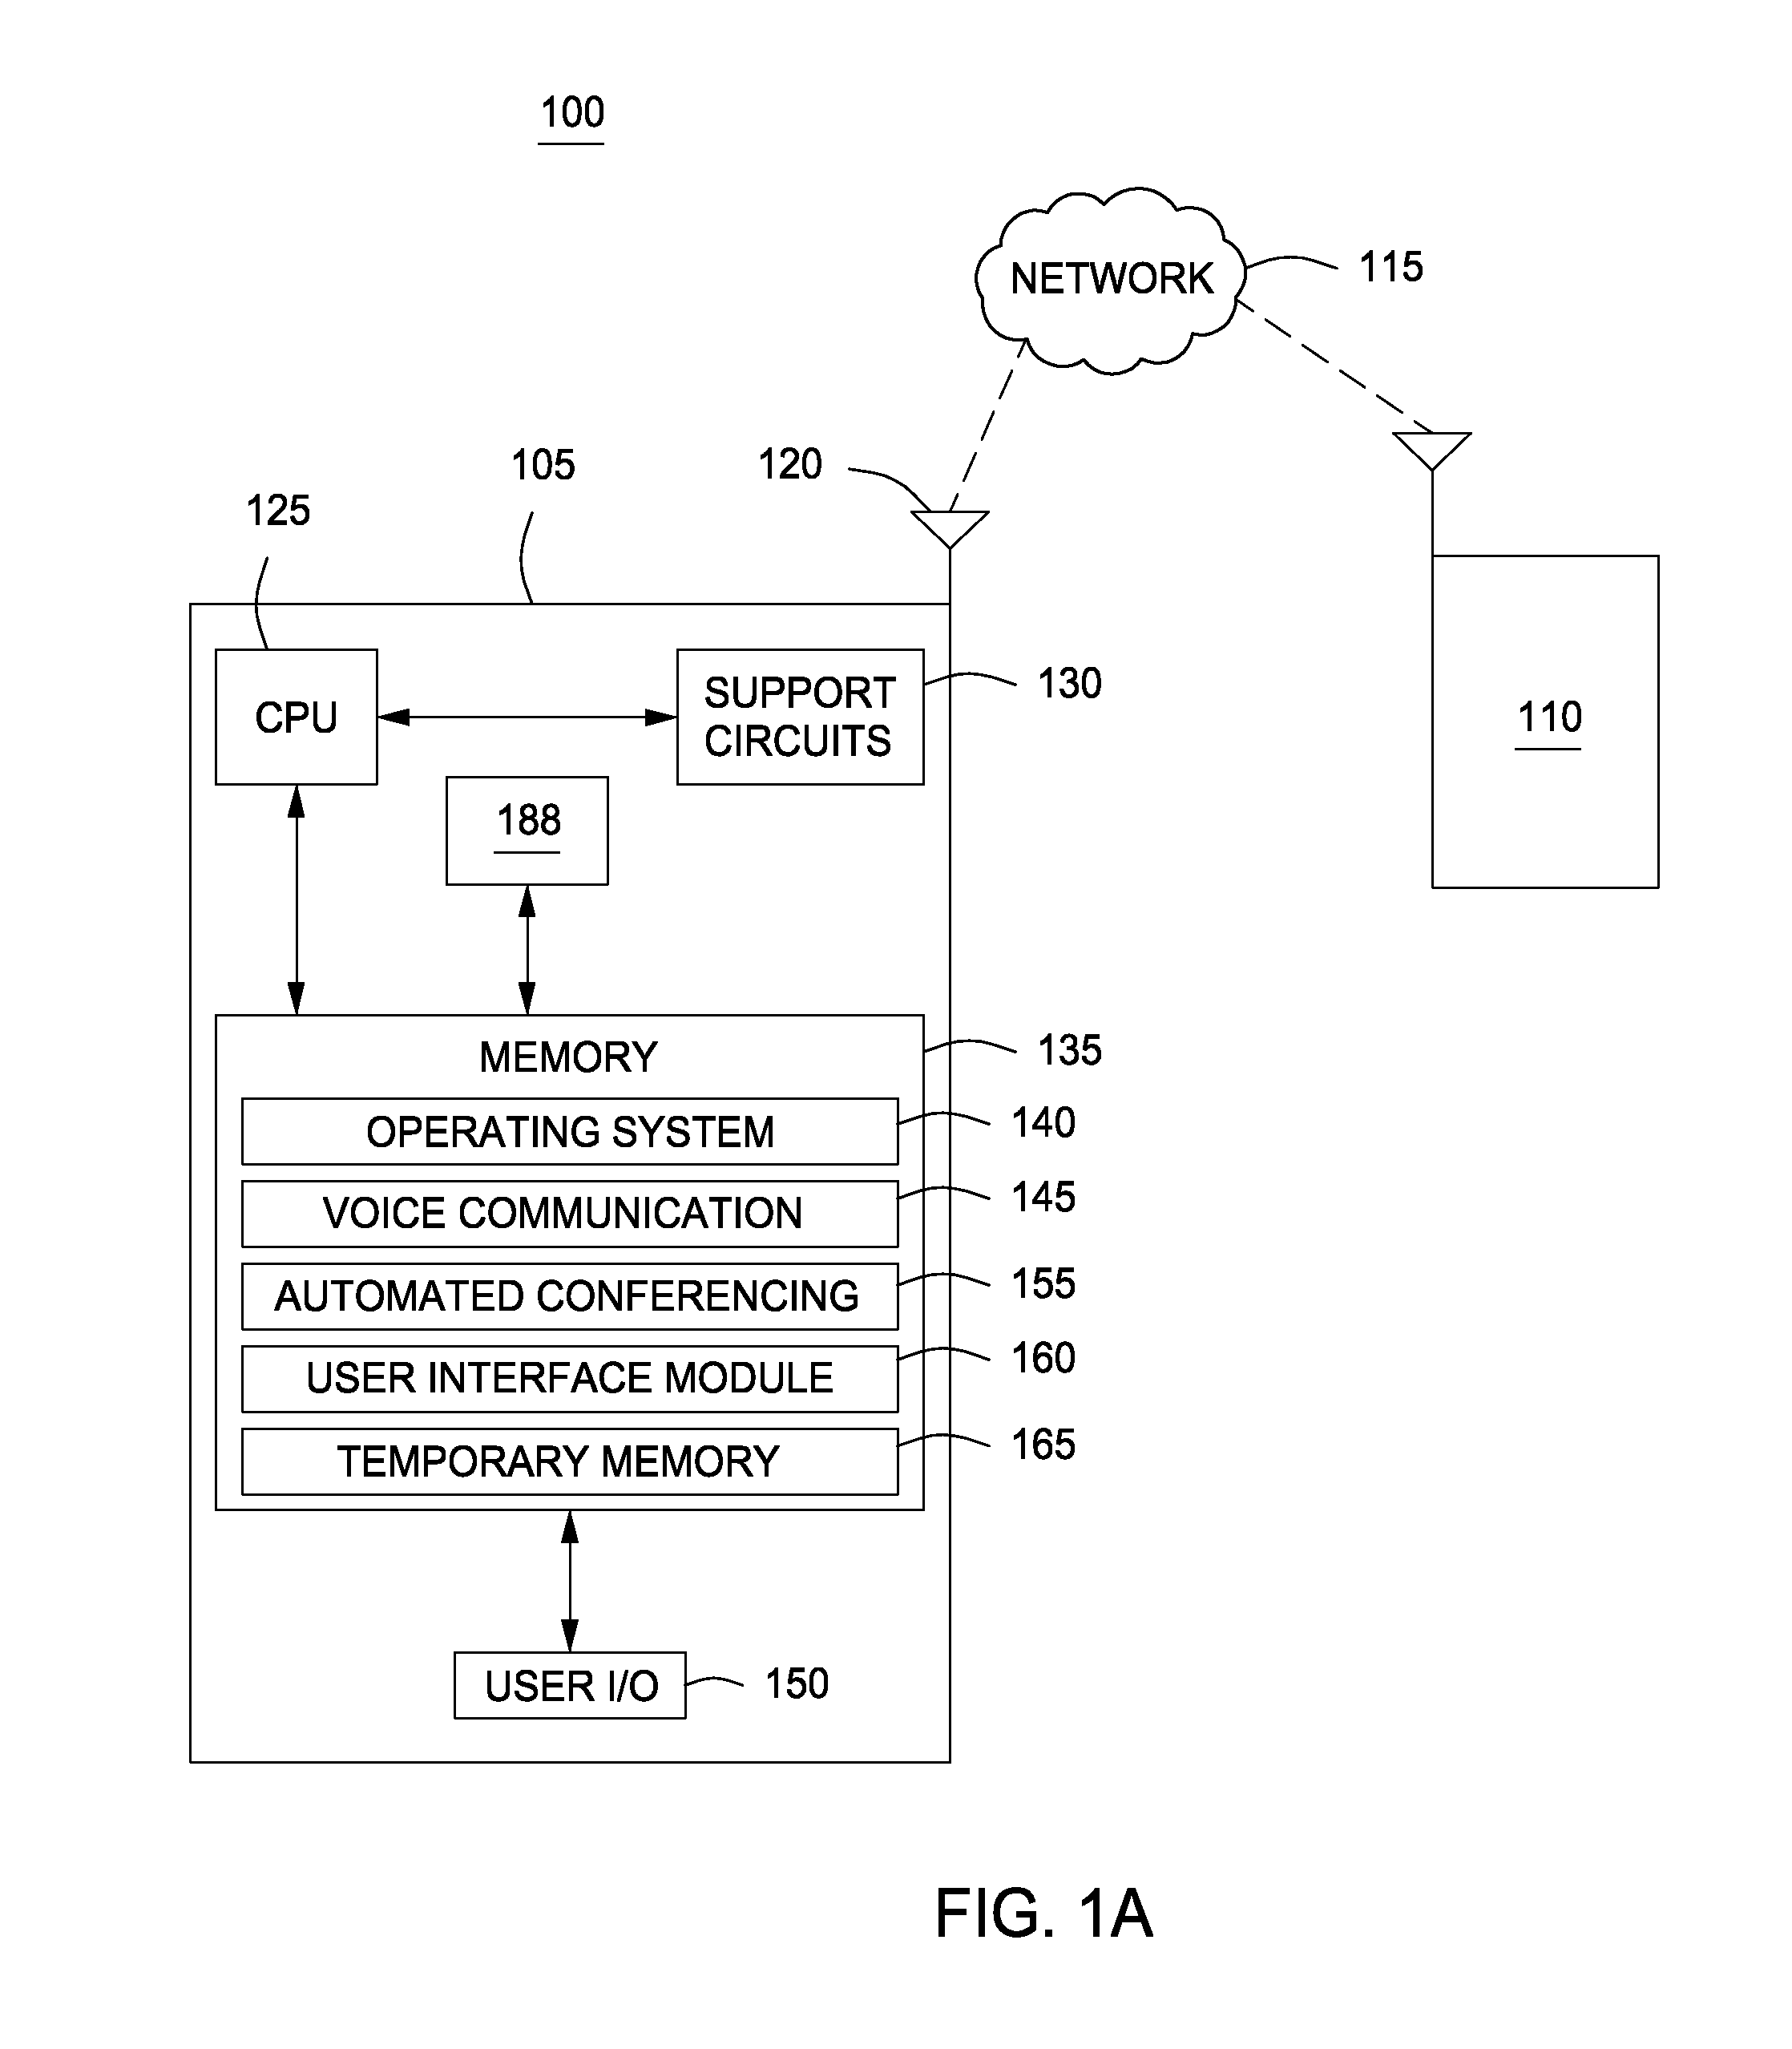 Method and system for automating conferencing in a communication session